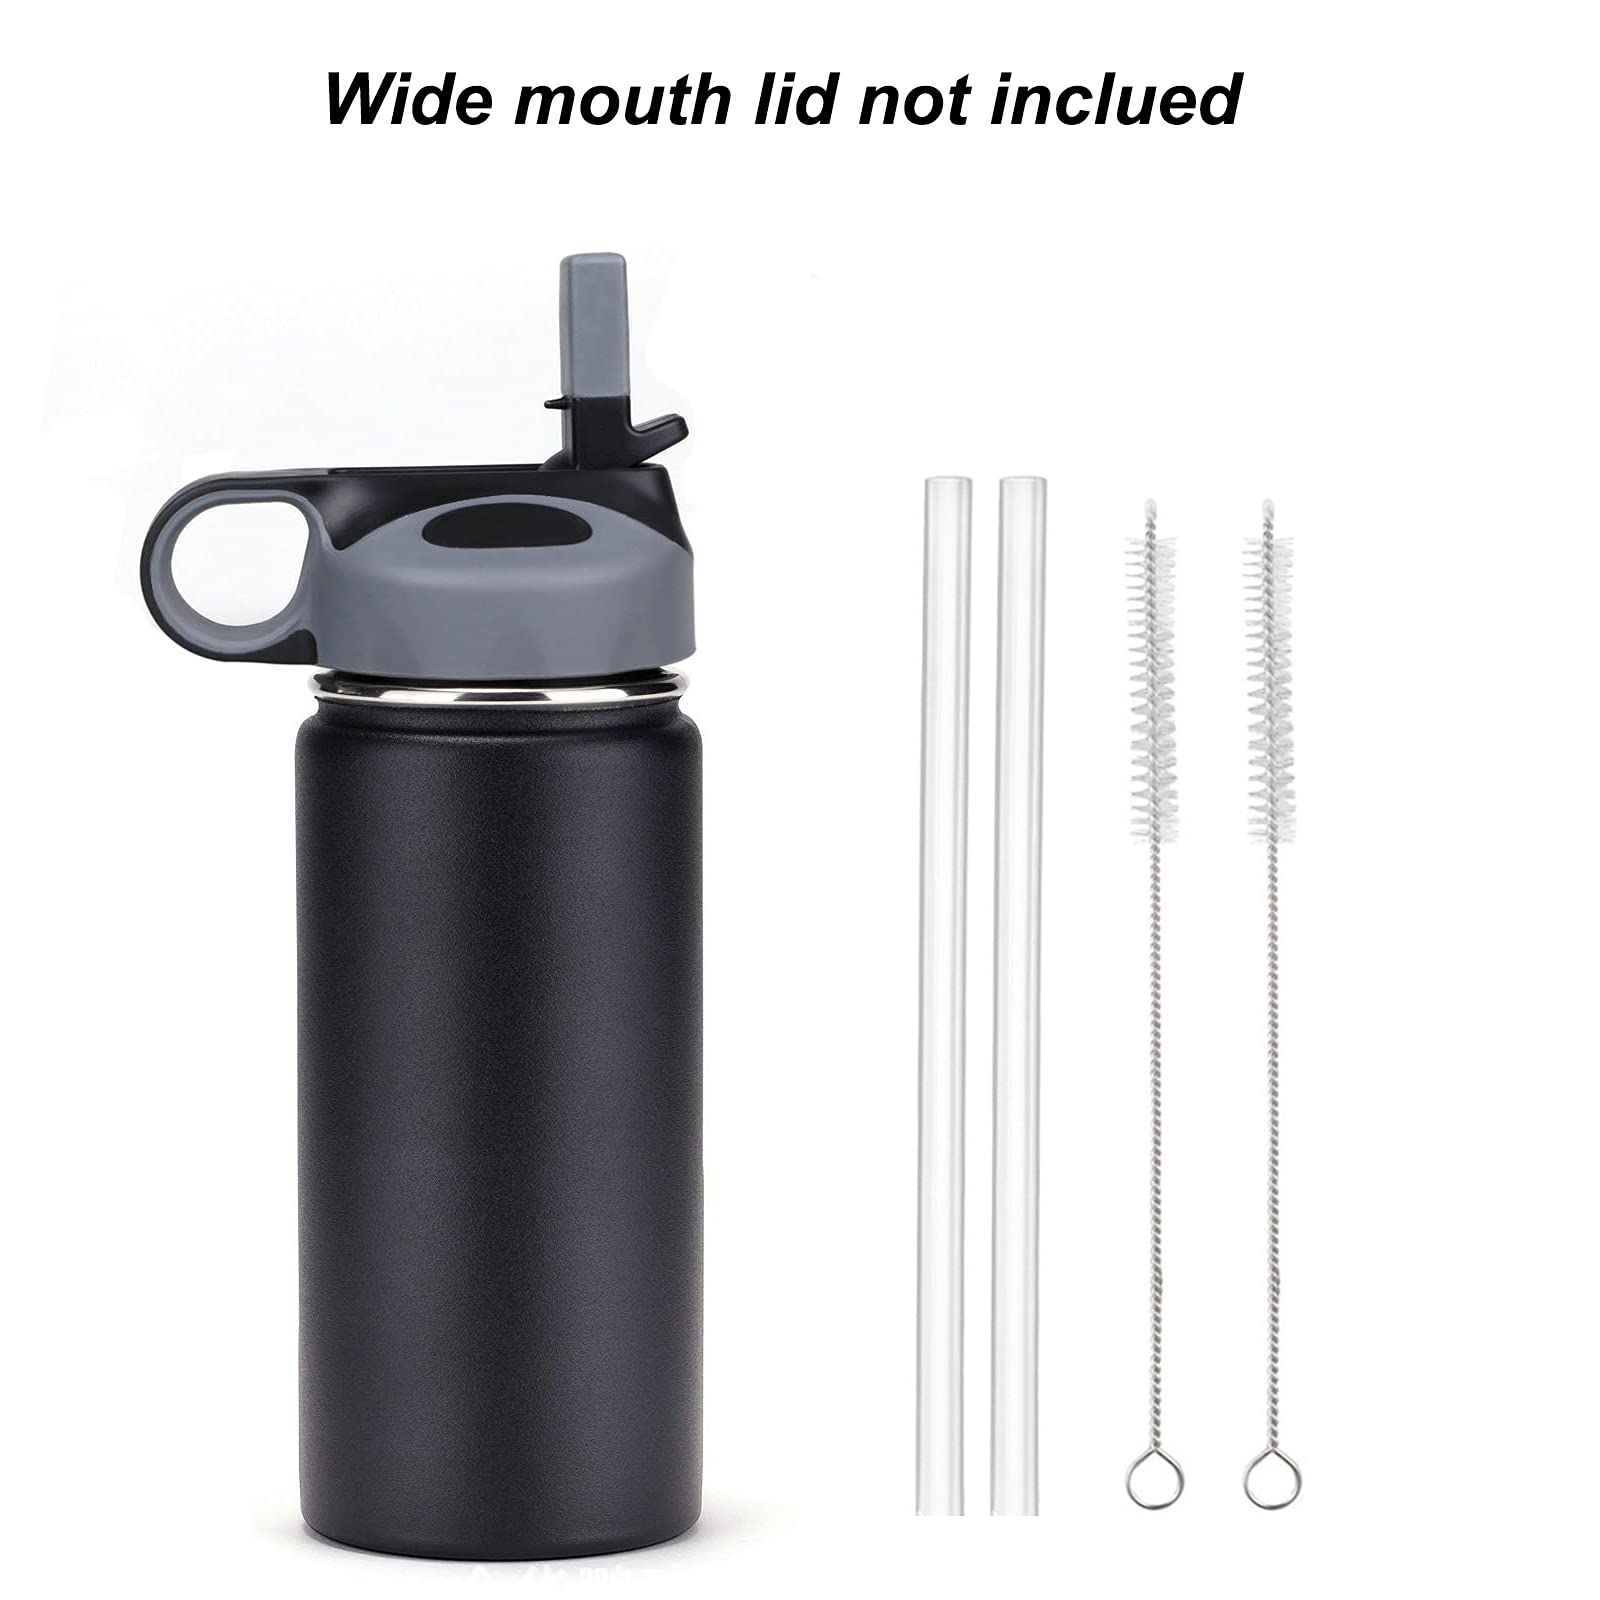 WAFJAMF 8 Replacement Hydroflask Straw with 4 Straw Brush,Compatible with Wide Mouth Bottle Straw Lid, BPA Free